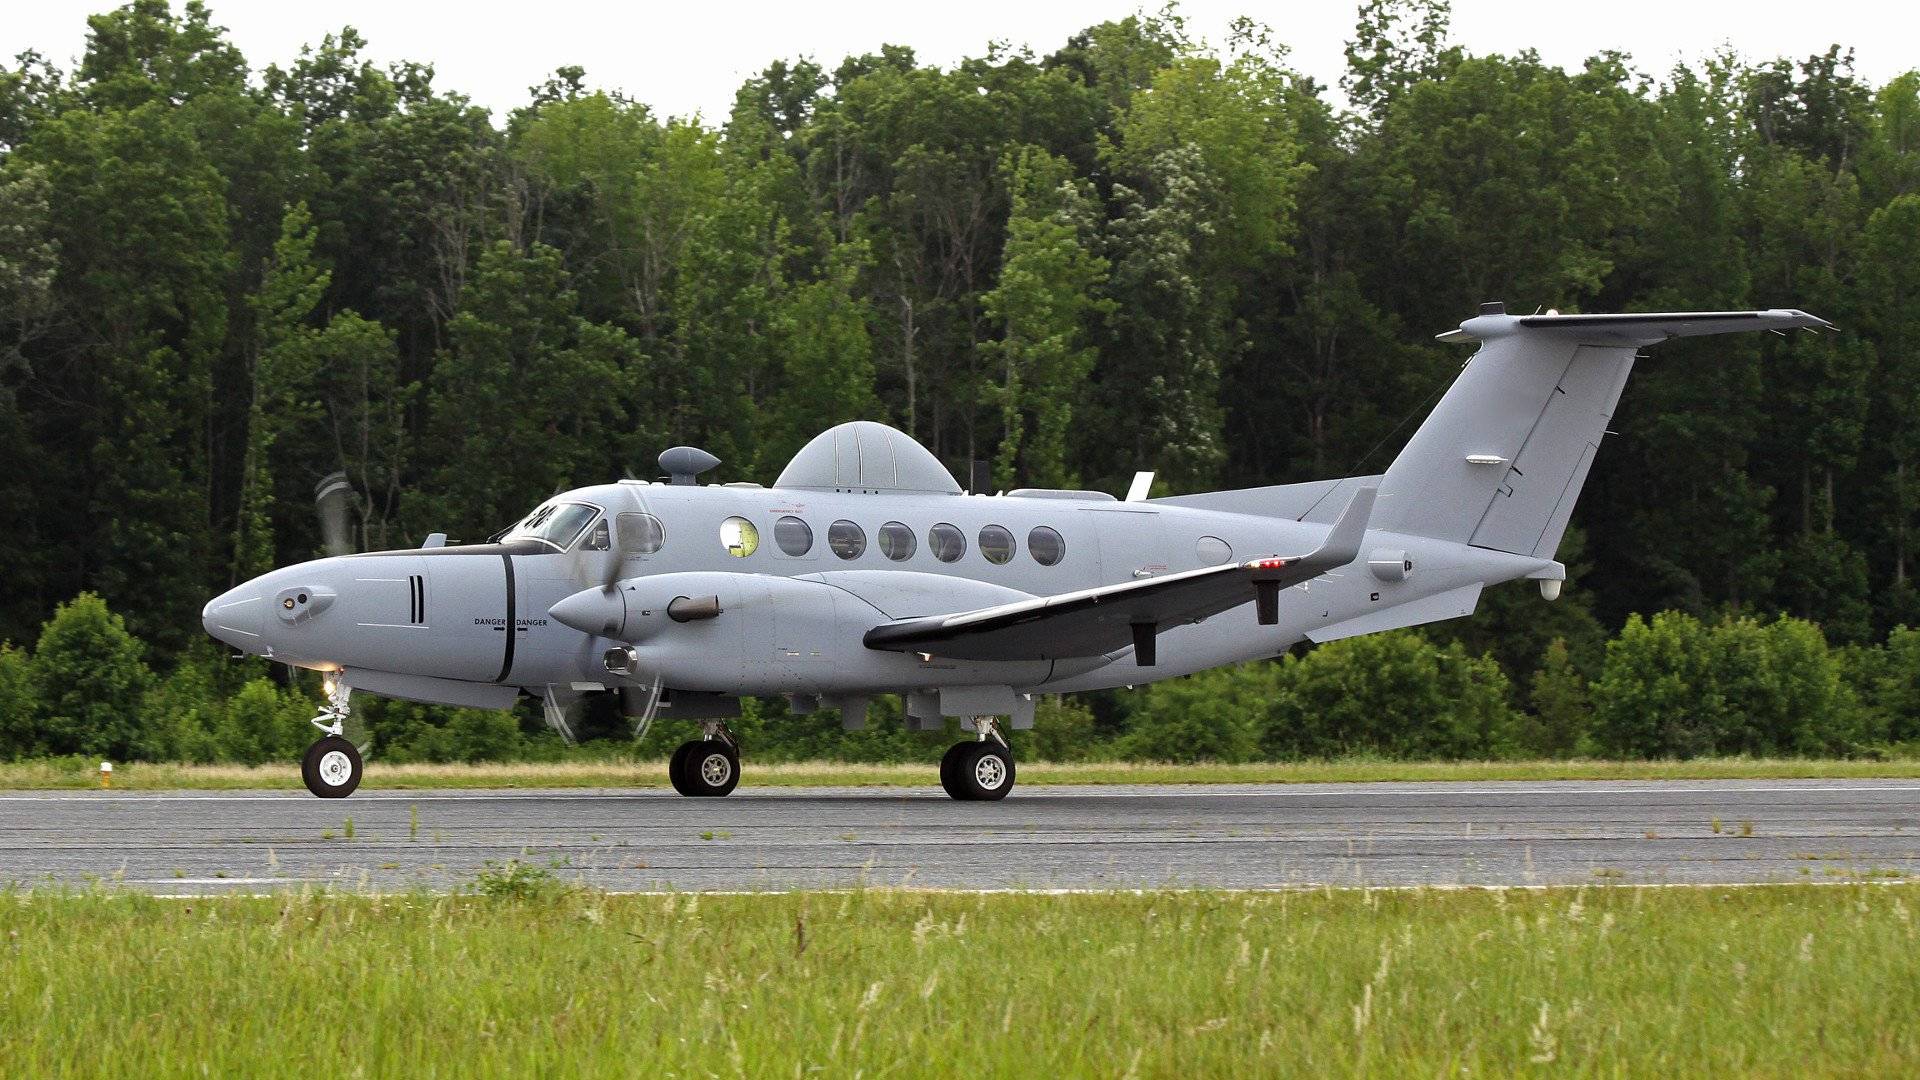 The Army’s Latest Spy Planes Are Flying Hundreds of Hours Overseas